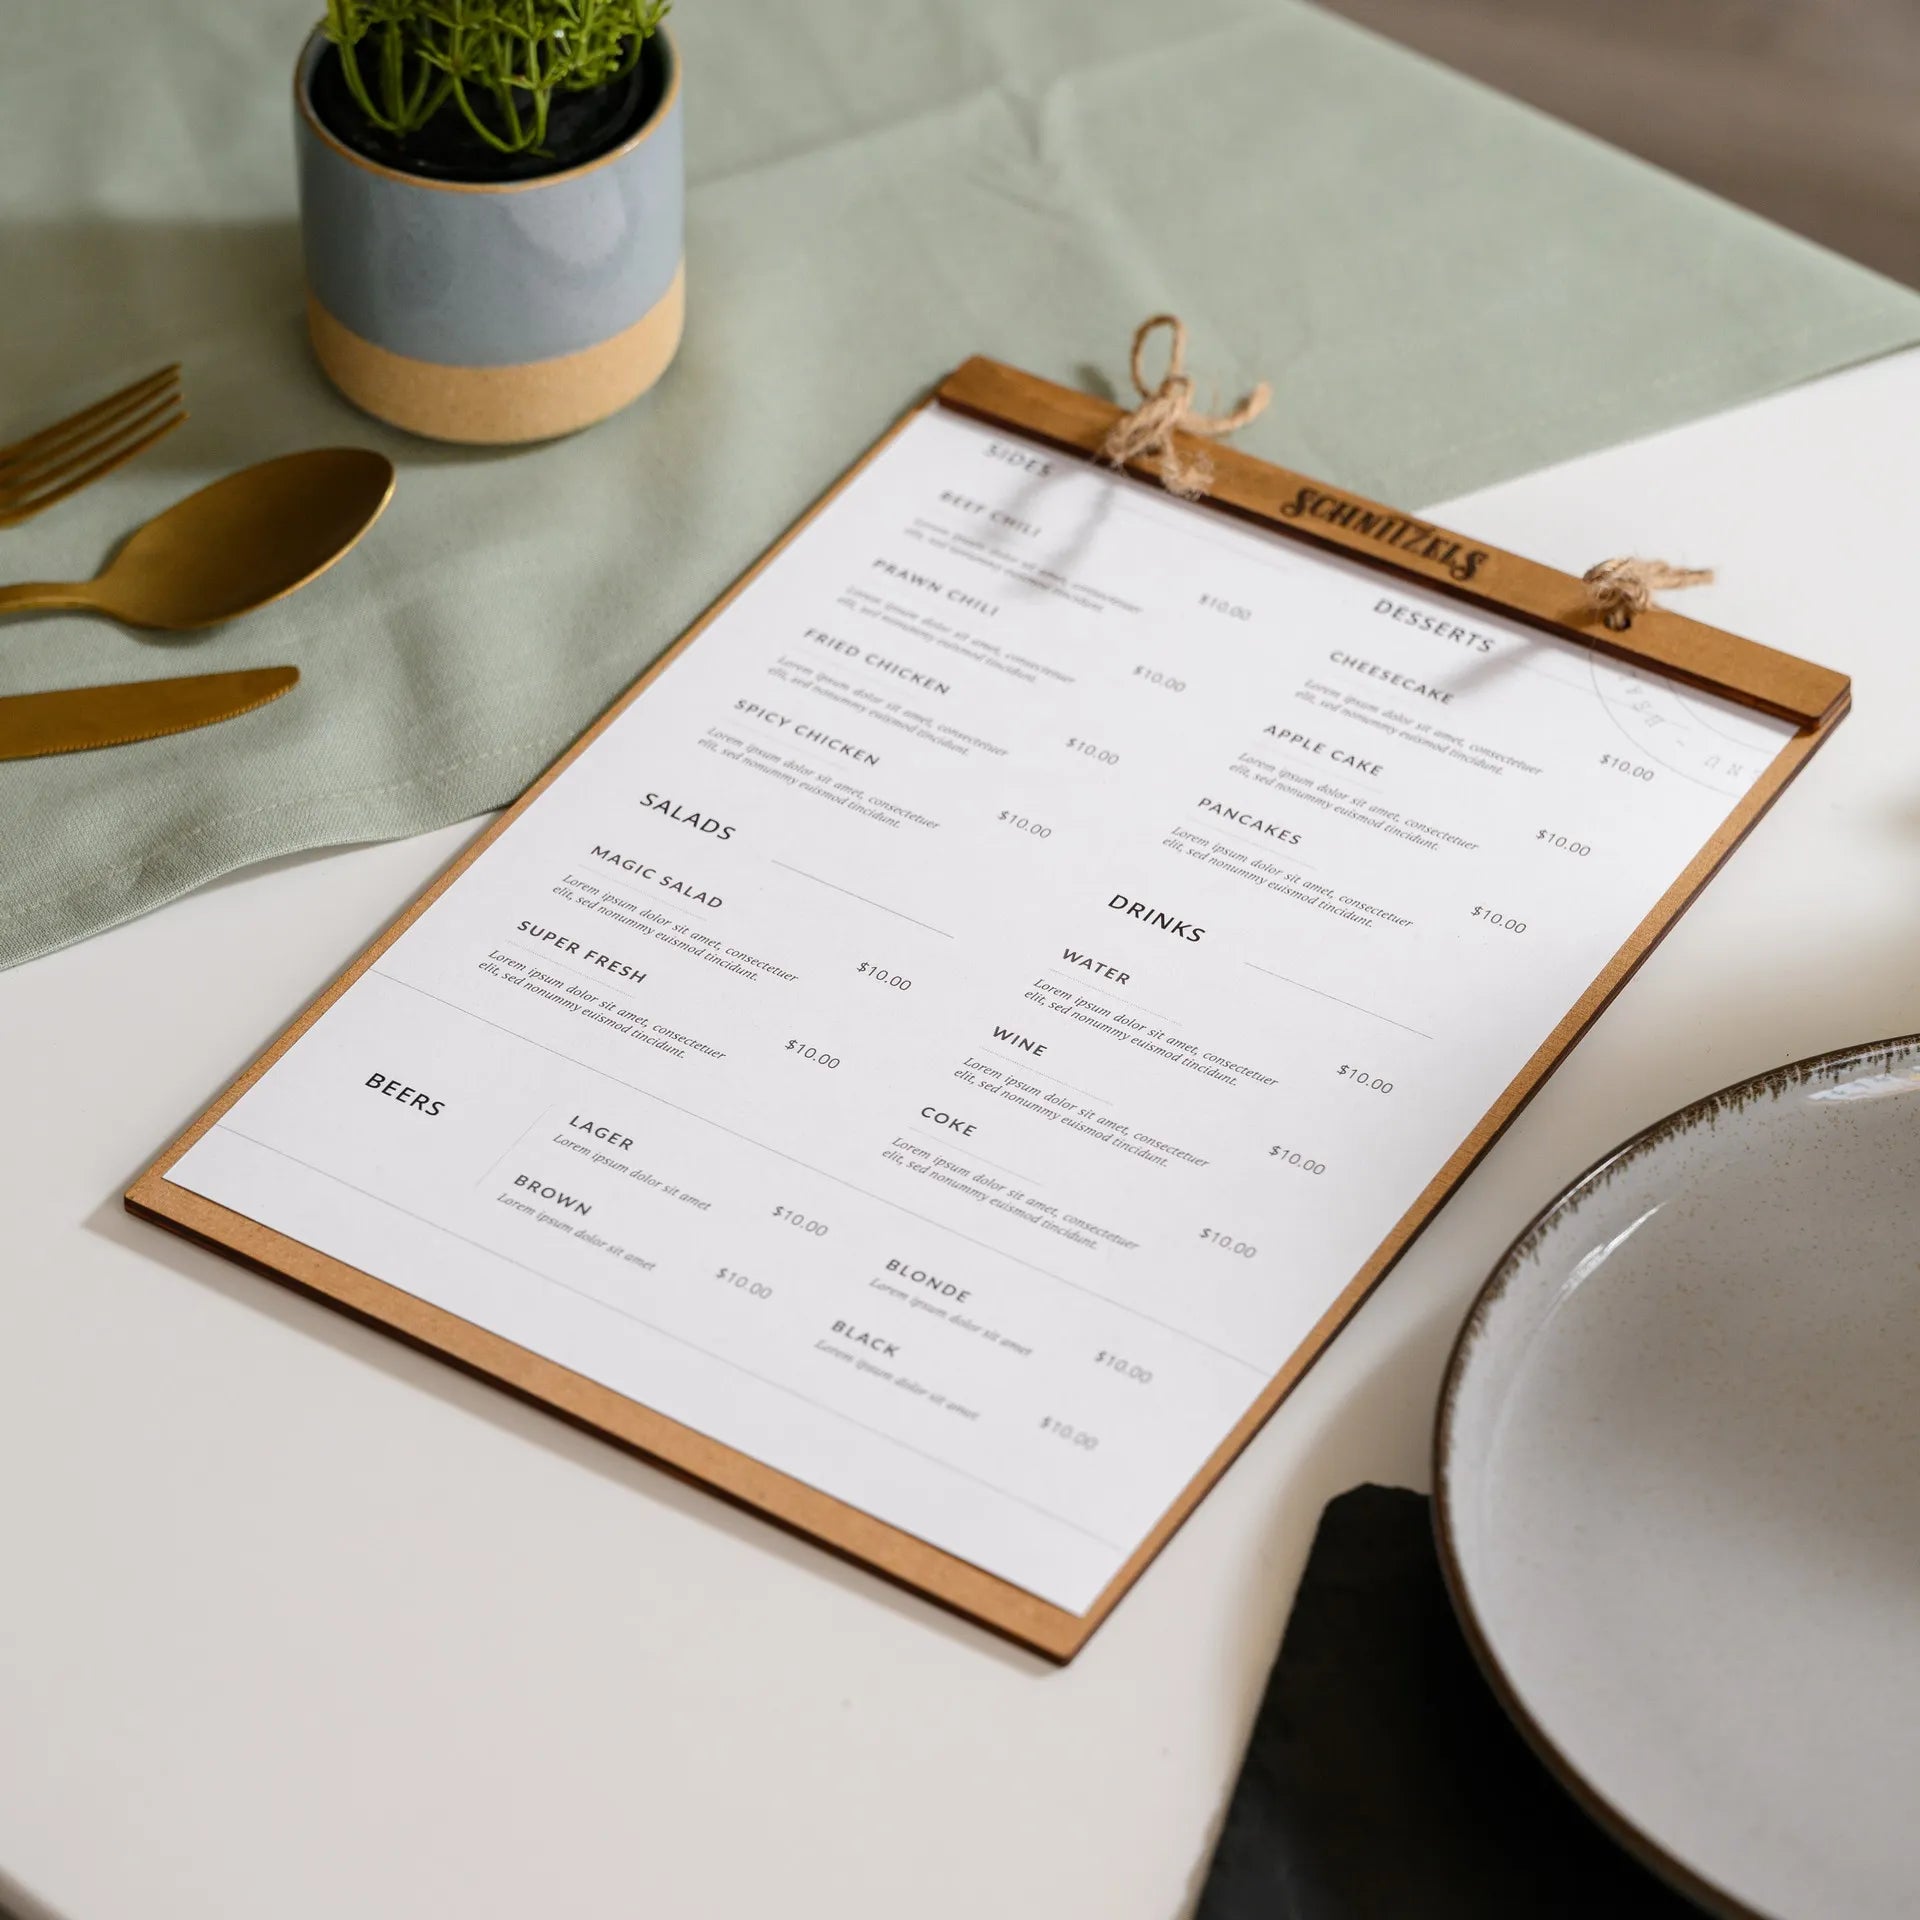 Engraved Menu Holder: Adds a touch of sophistication to your menu presentation.